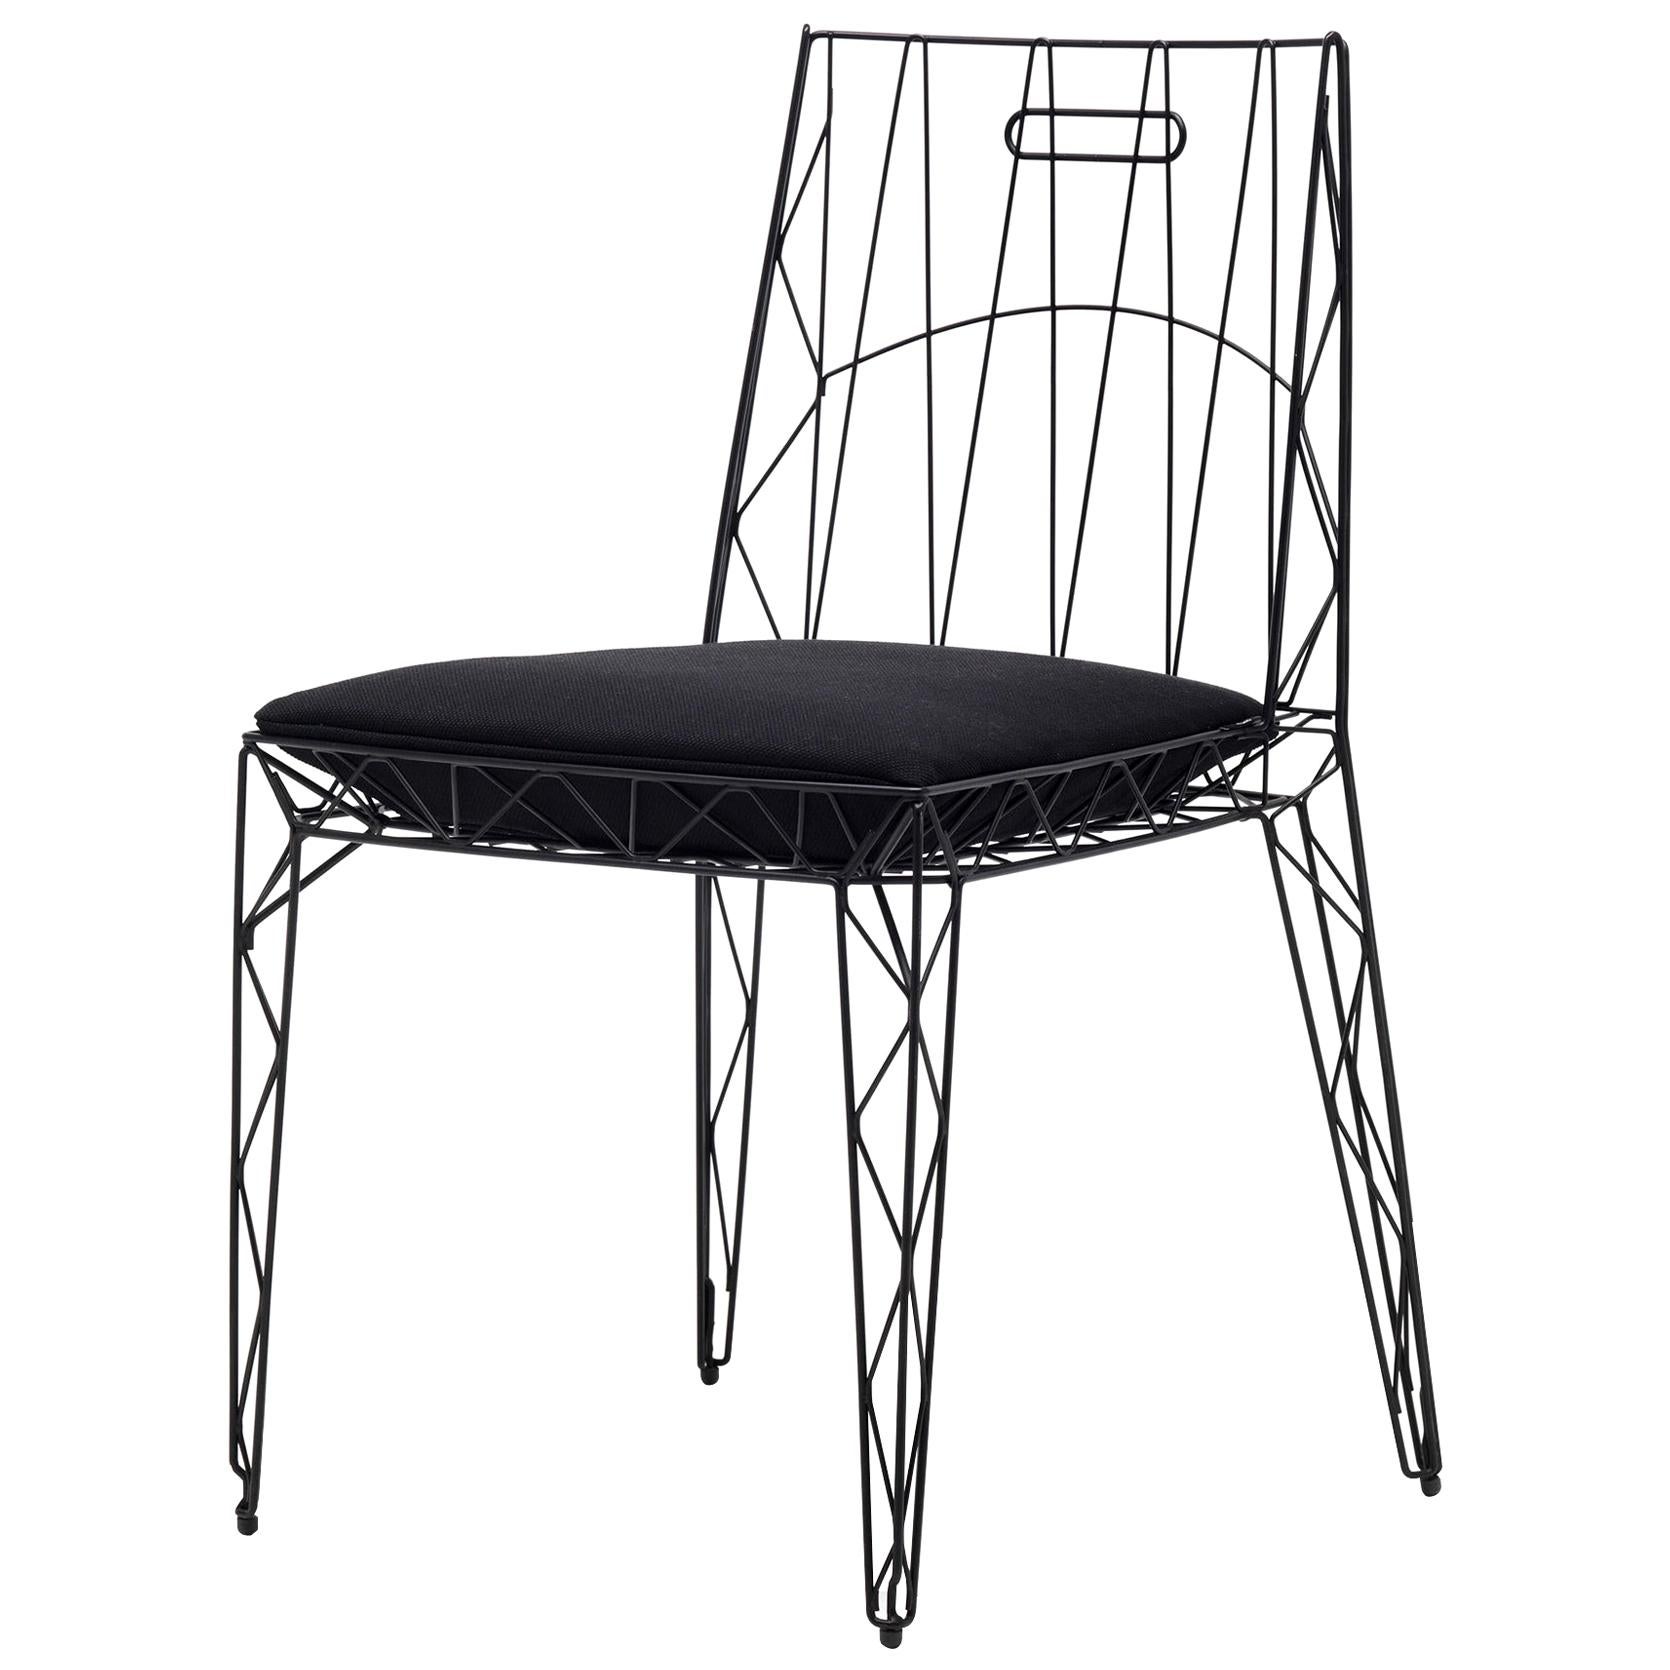 21st Century Modern Ultralight Chair With Steel Wire Frame and Fabric Cushions For Sale